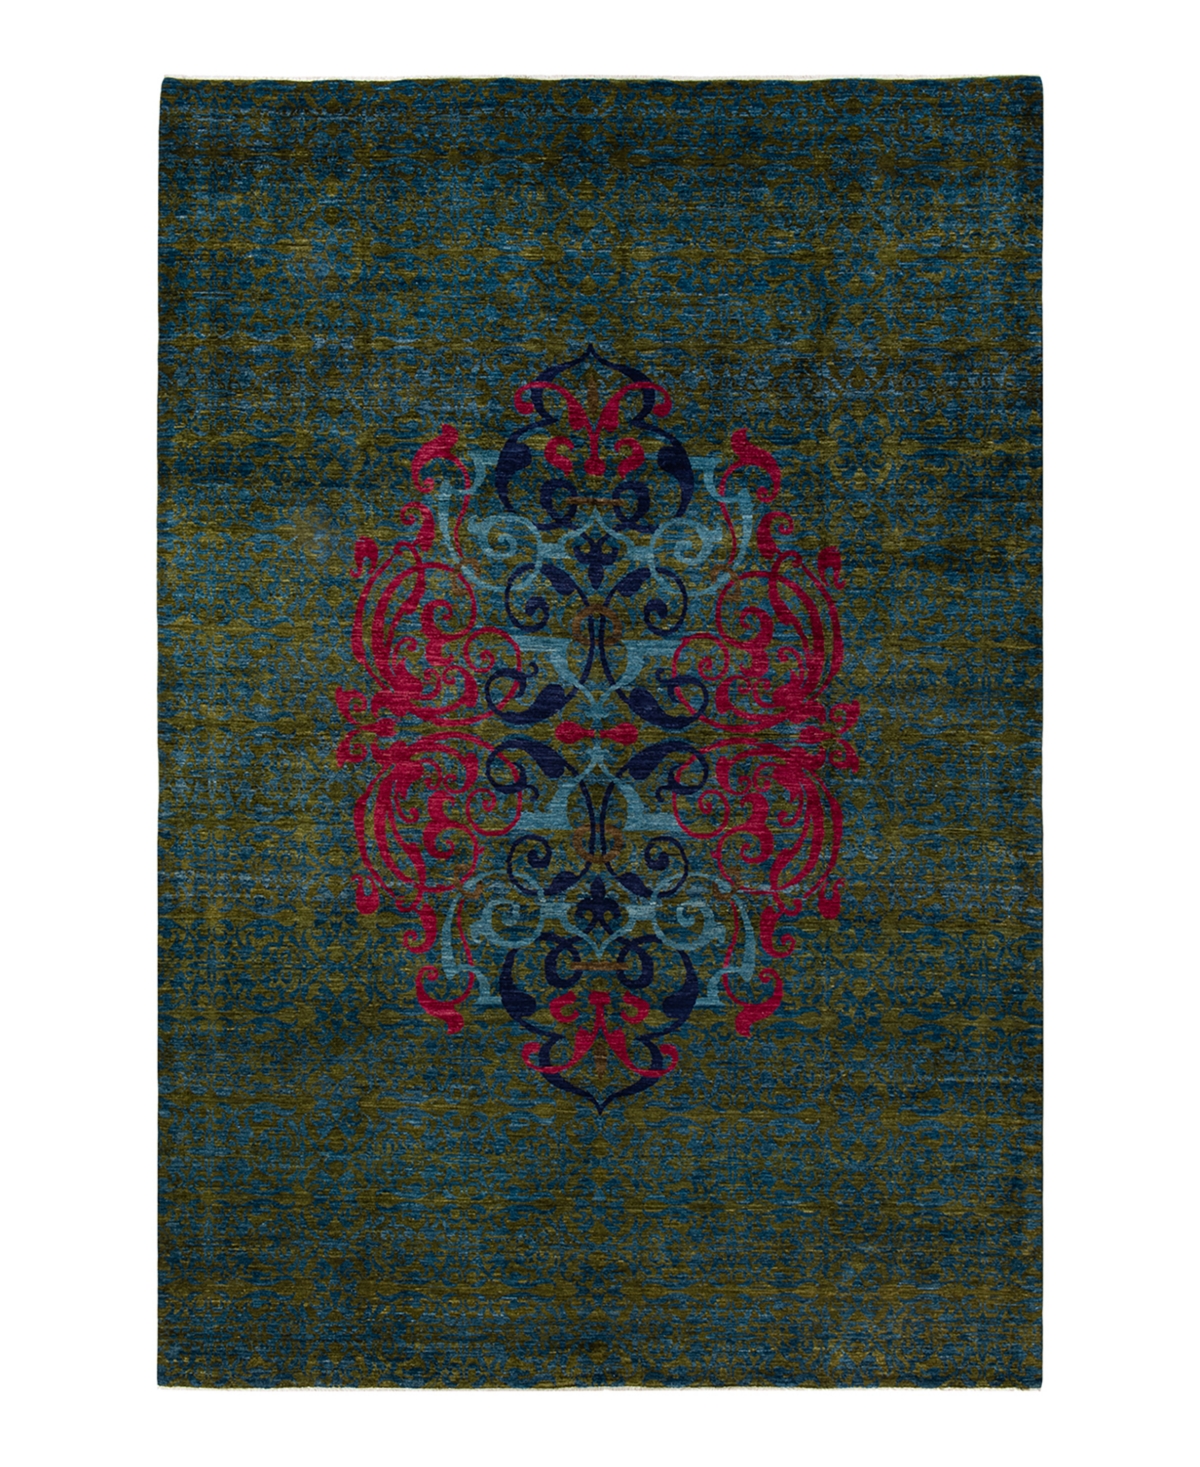 Adorn Hand Woven Rugs Suzani M1724 9'10in x 14'4in Area Rug - Green